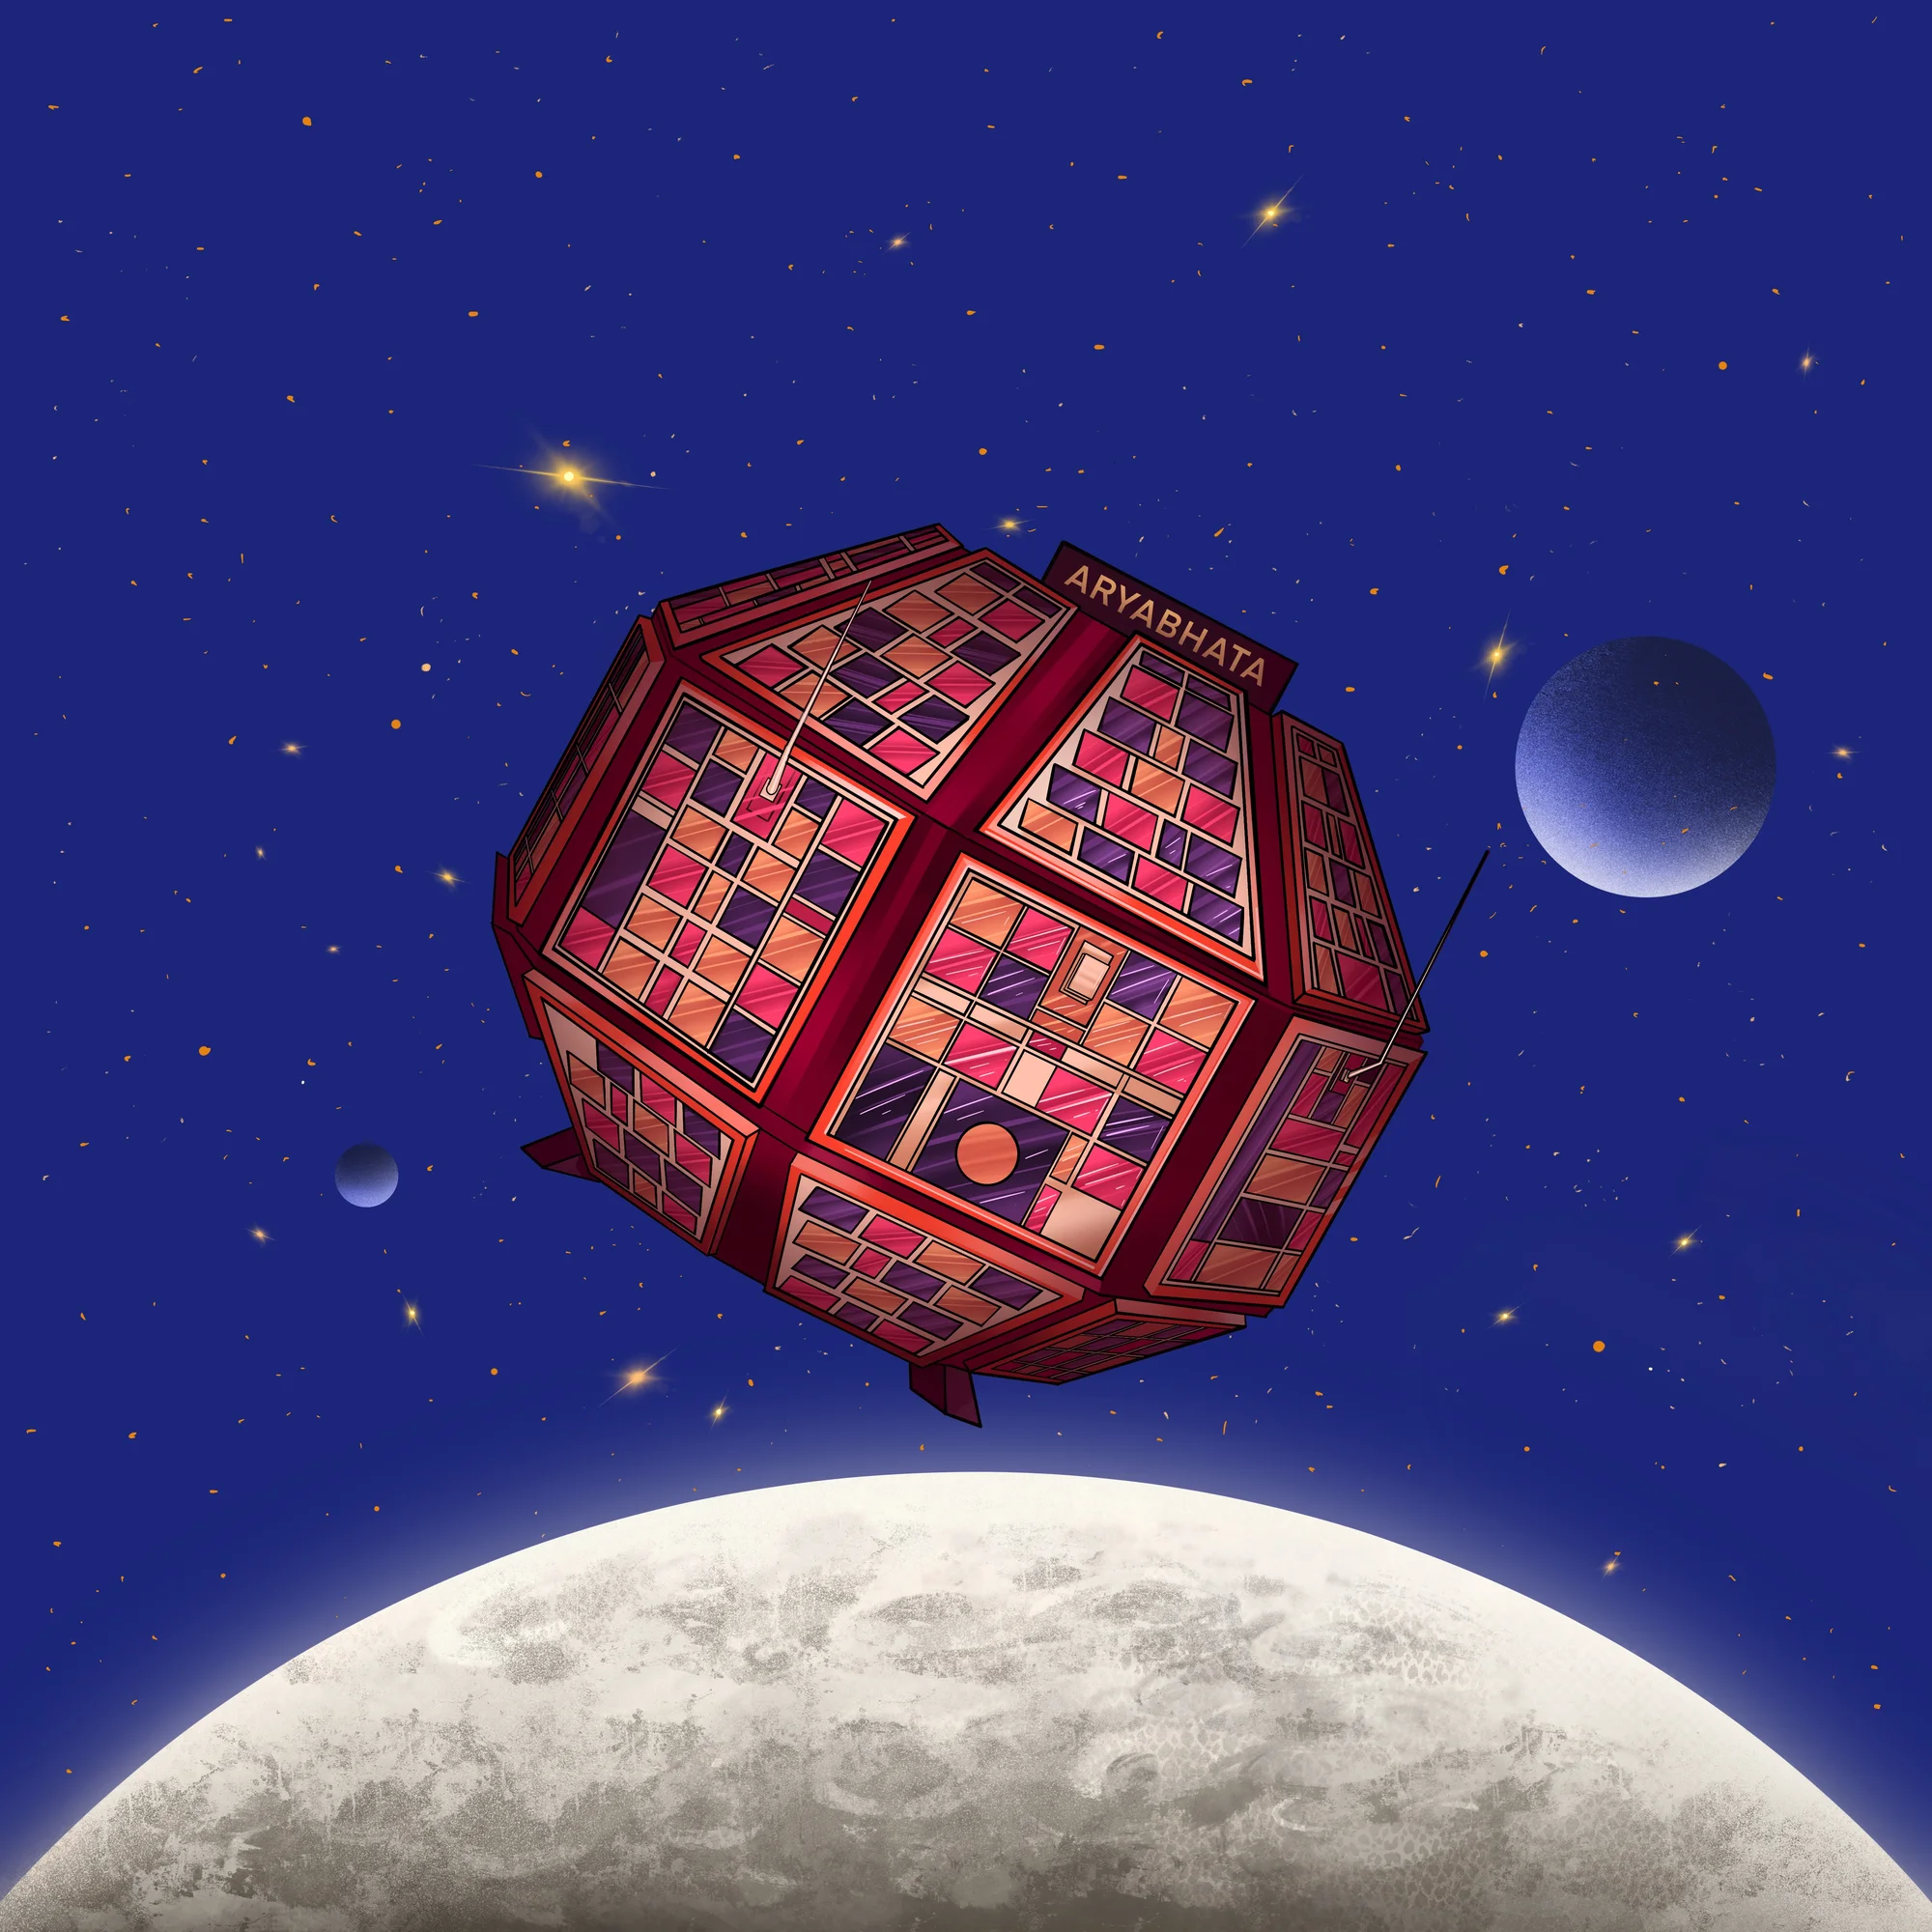 Illustration of an octagonal prism structure with a purple, red, orange grid patterned and labeled “Aryabhata” floating in outer space between stars and two planets.